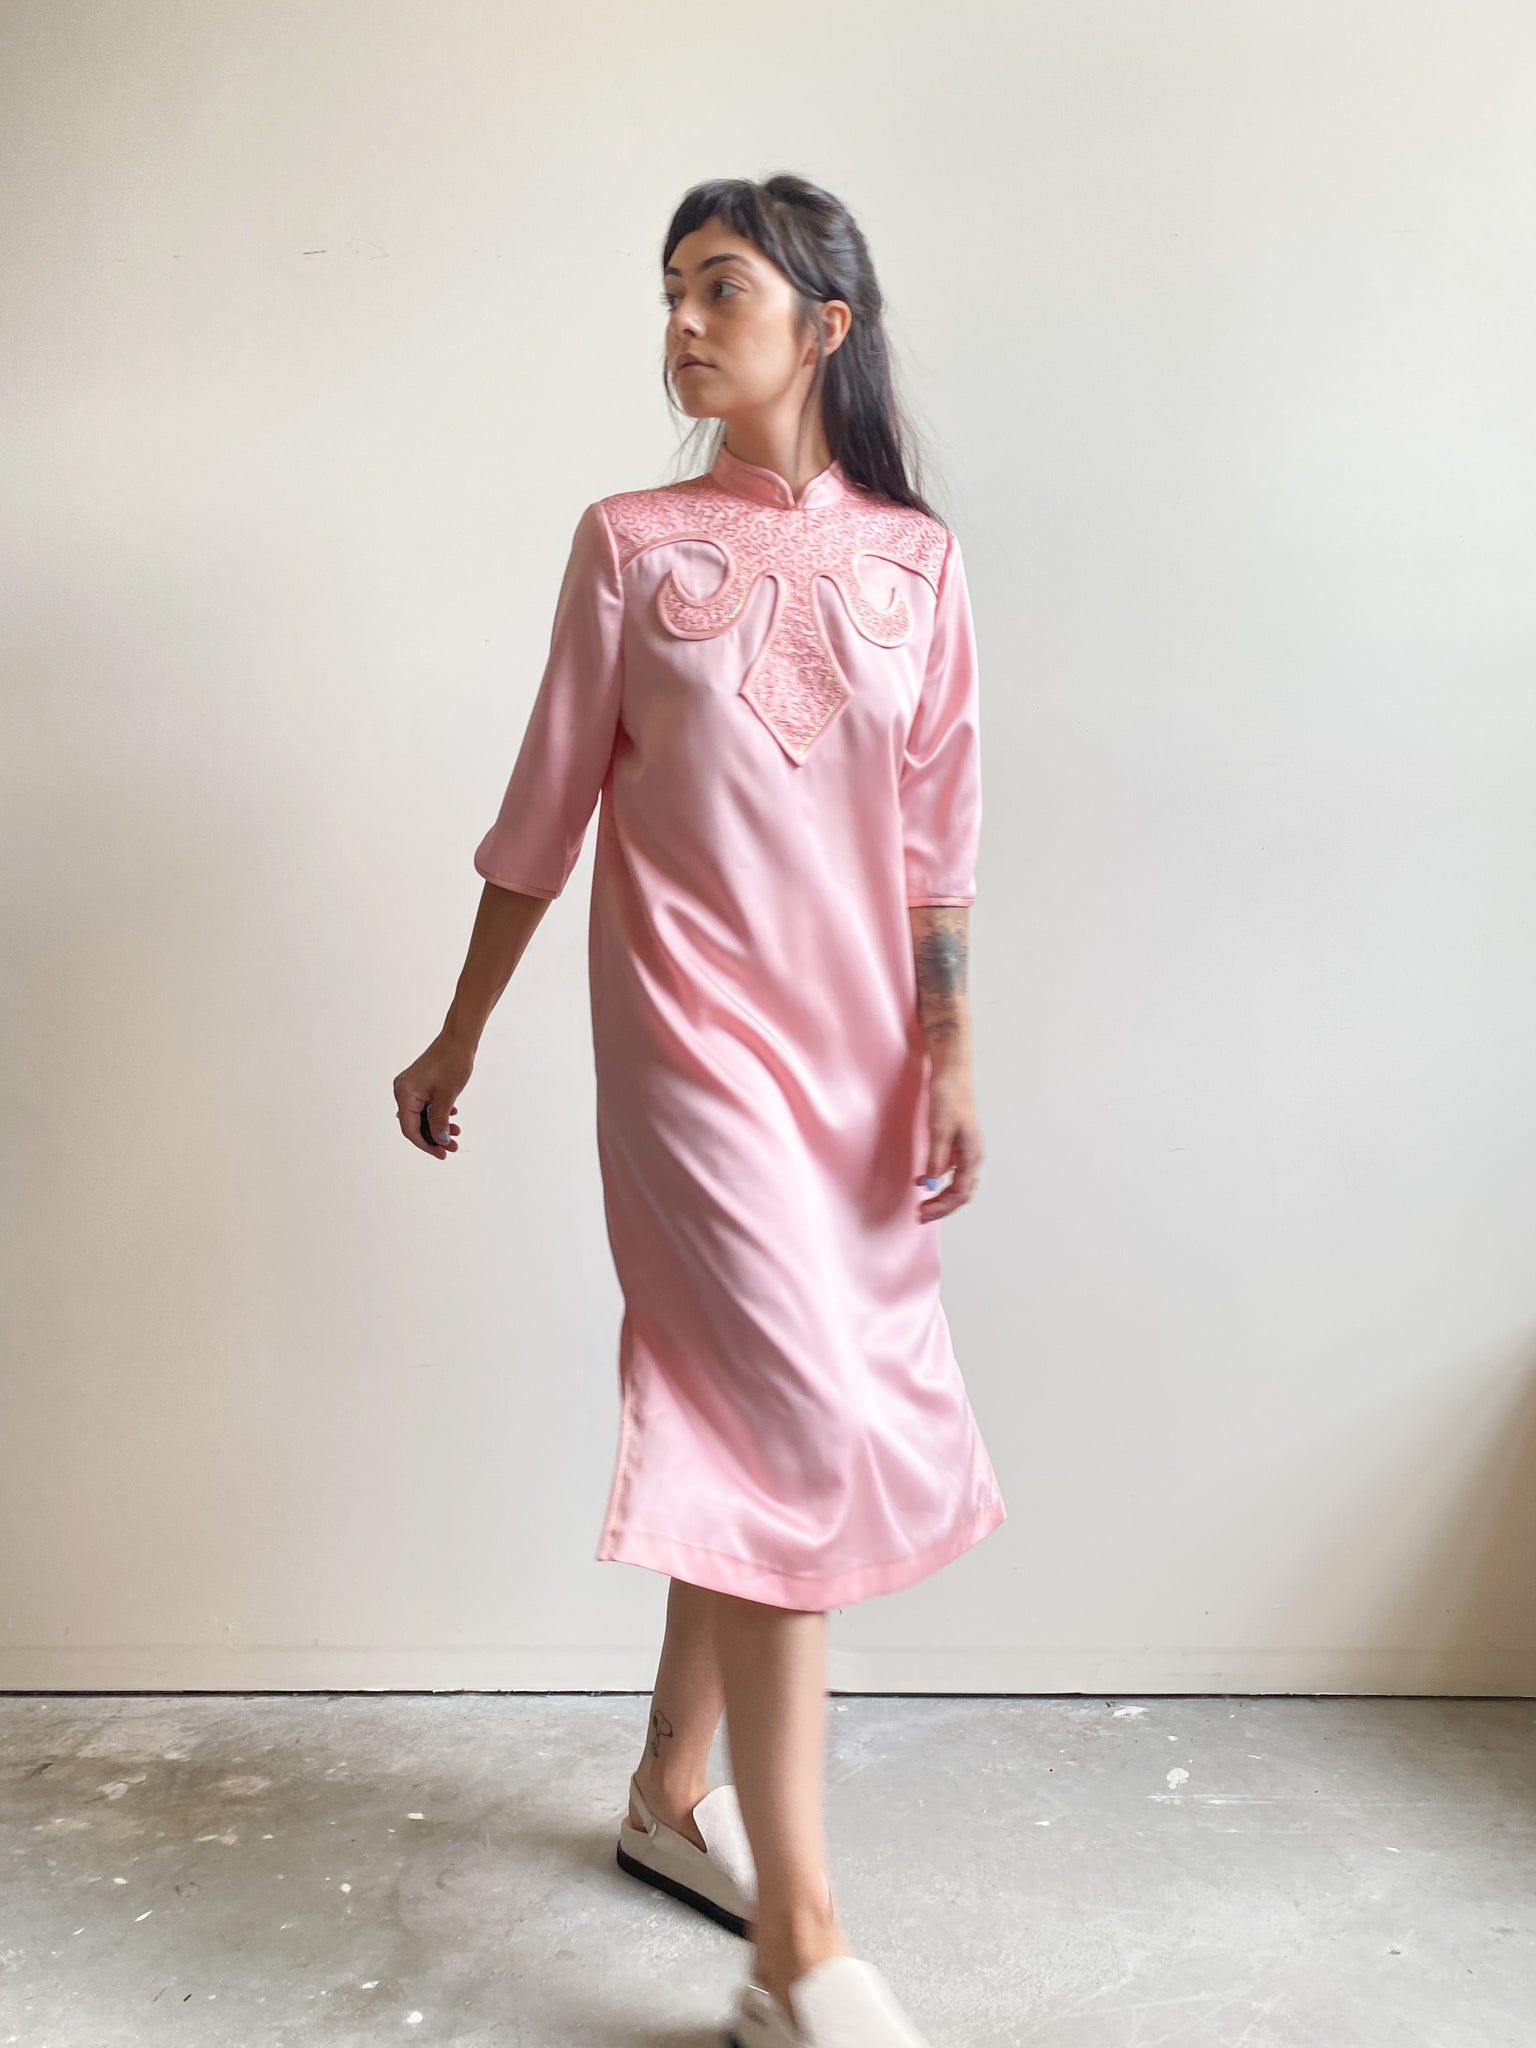 Vintage Baby Pink Quarter Sleeve Dress with Embroidered High Neck and Gold Stitching (S)